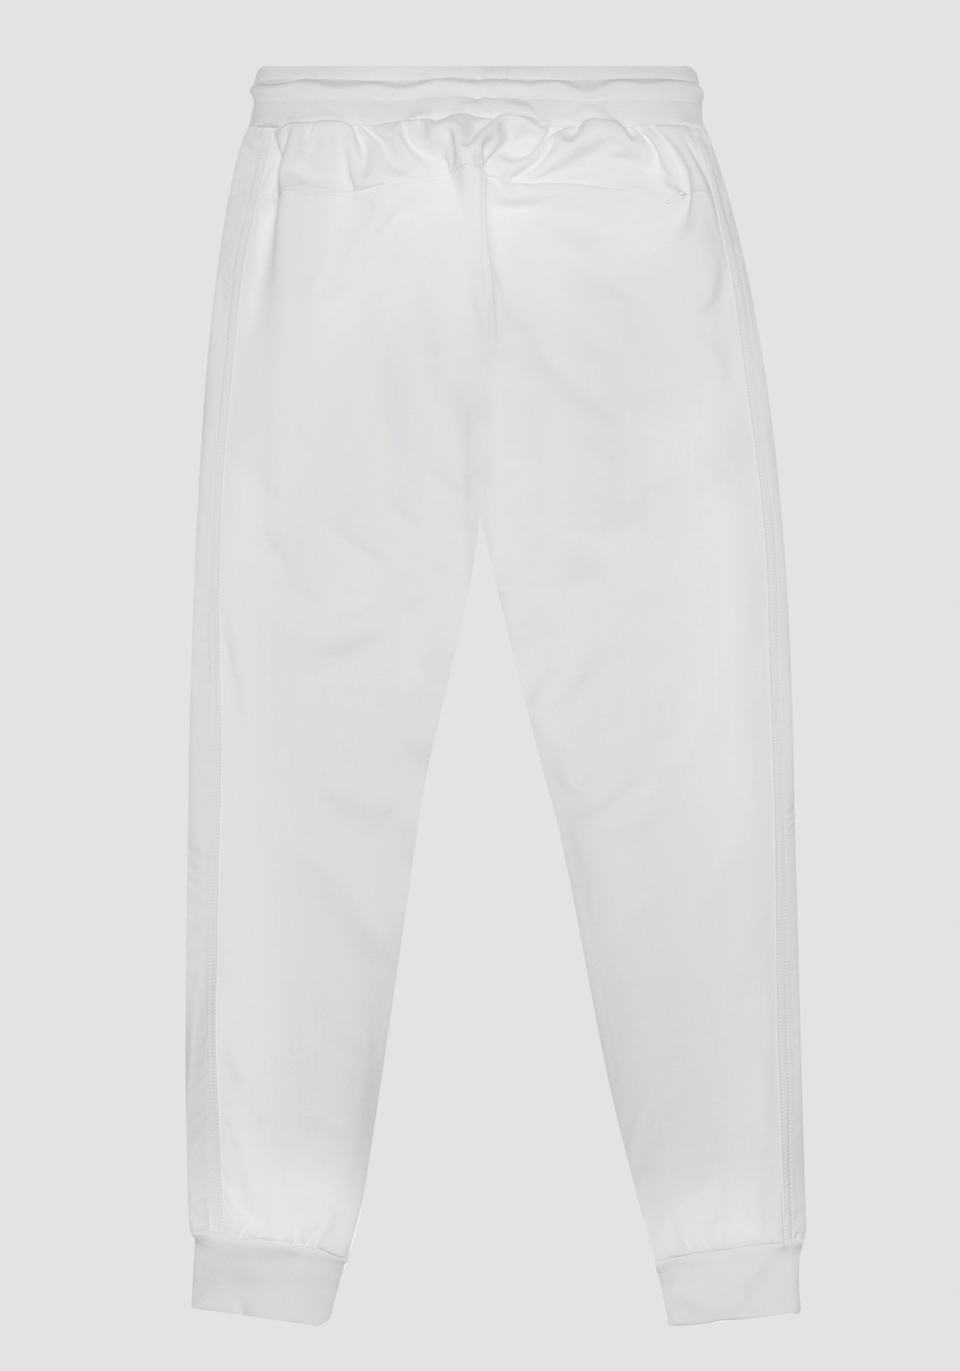 SLIM FIT SWEAT PANTS WITH EMBROIDERED LOGO - Antony Morato Online Shop